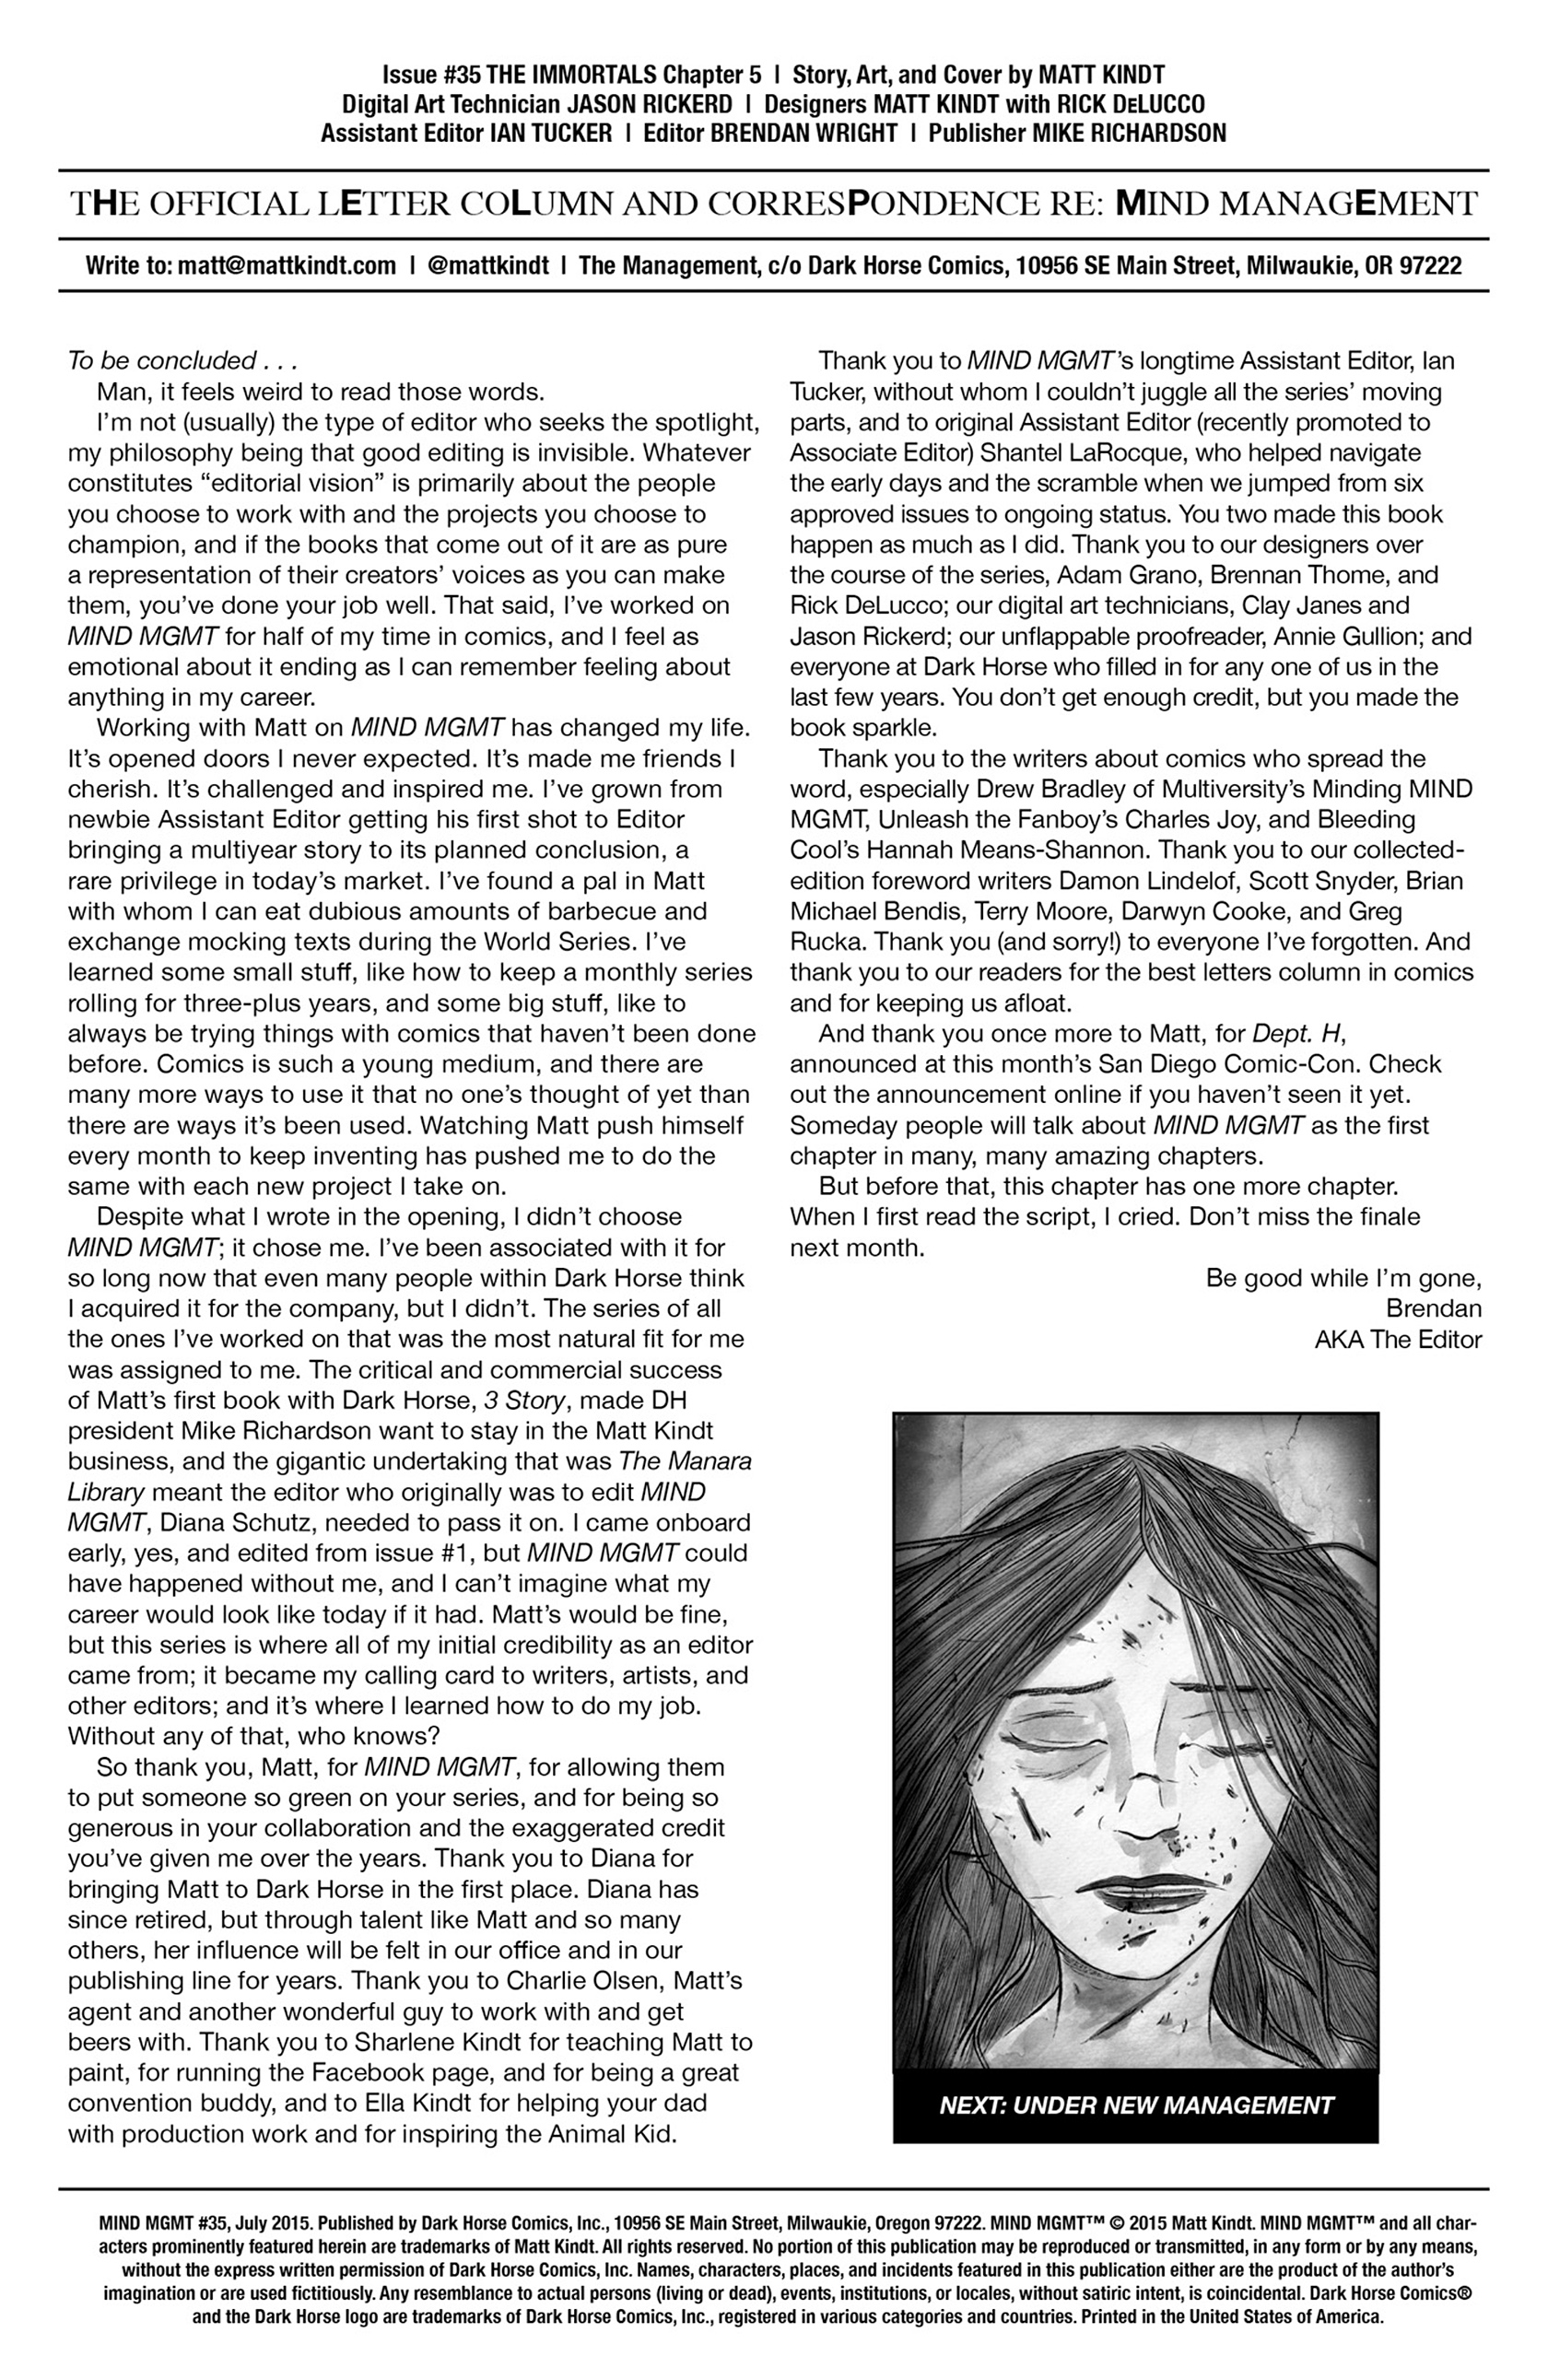 Read online MIND MGMT comic -  Issue #35 - 34